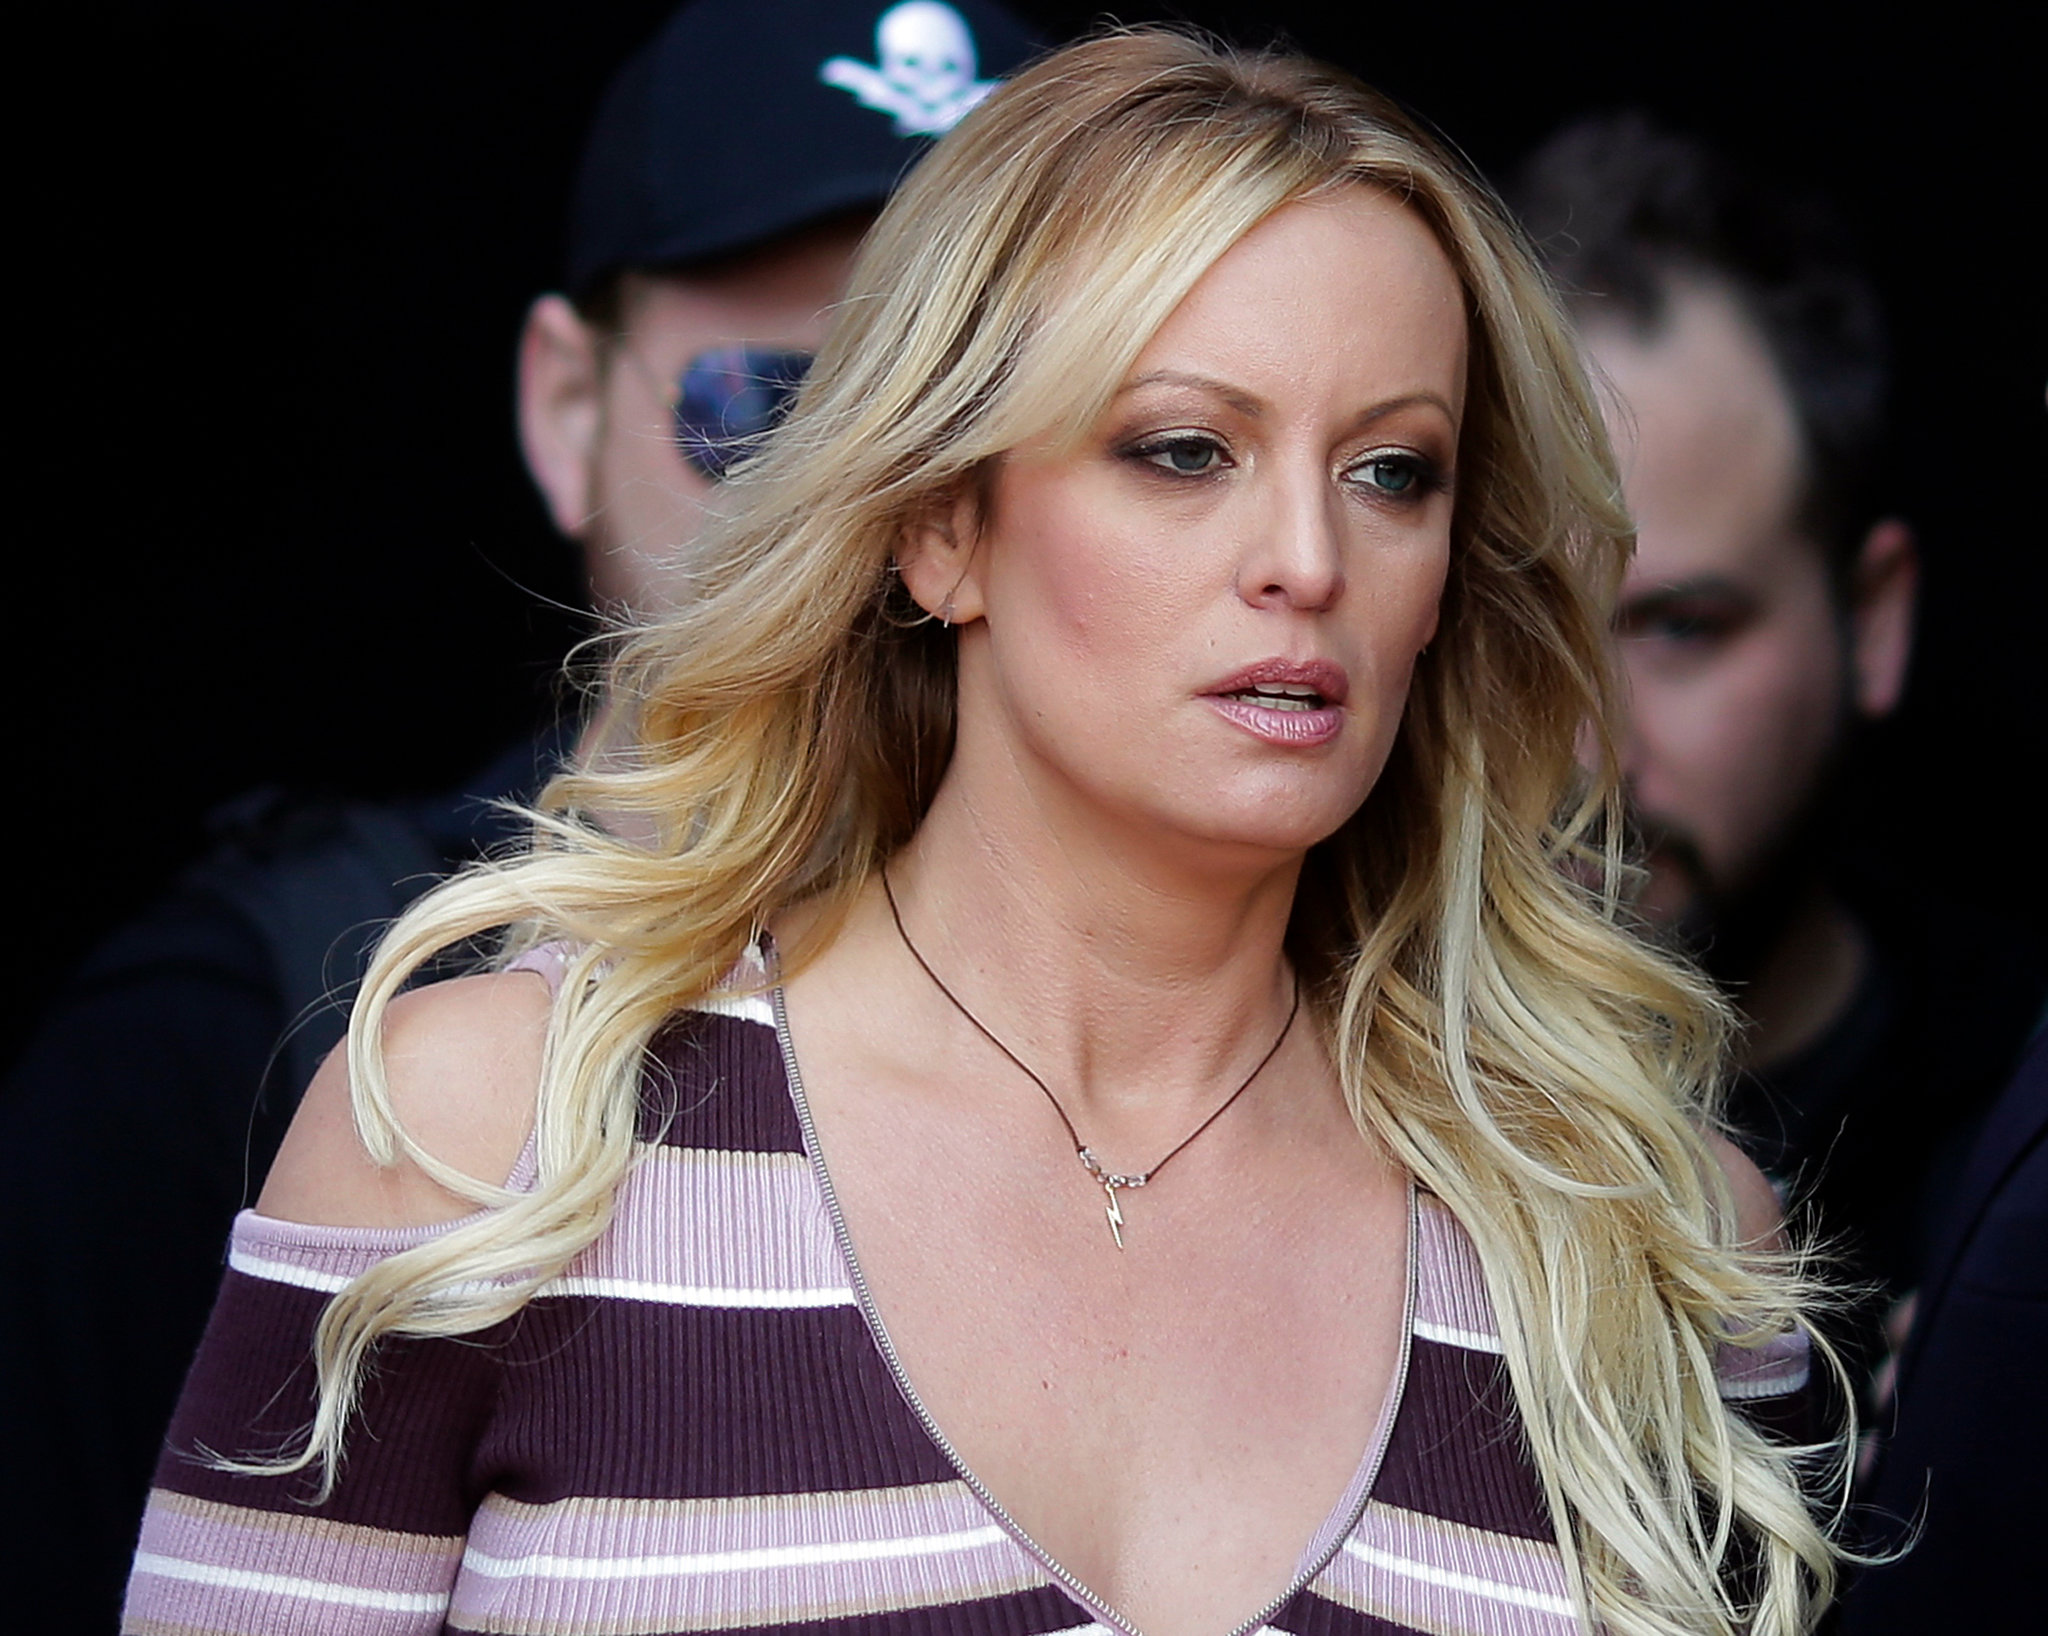 cody coward recommends stormy daniels boobs real pic